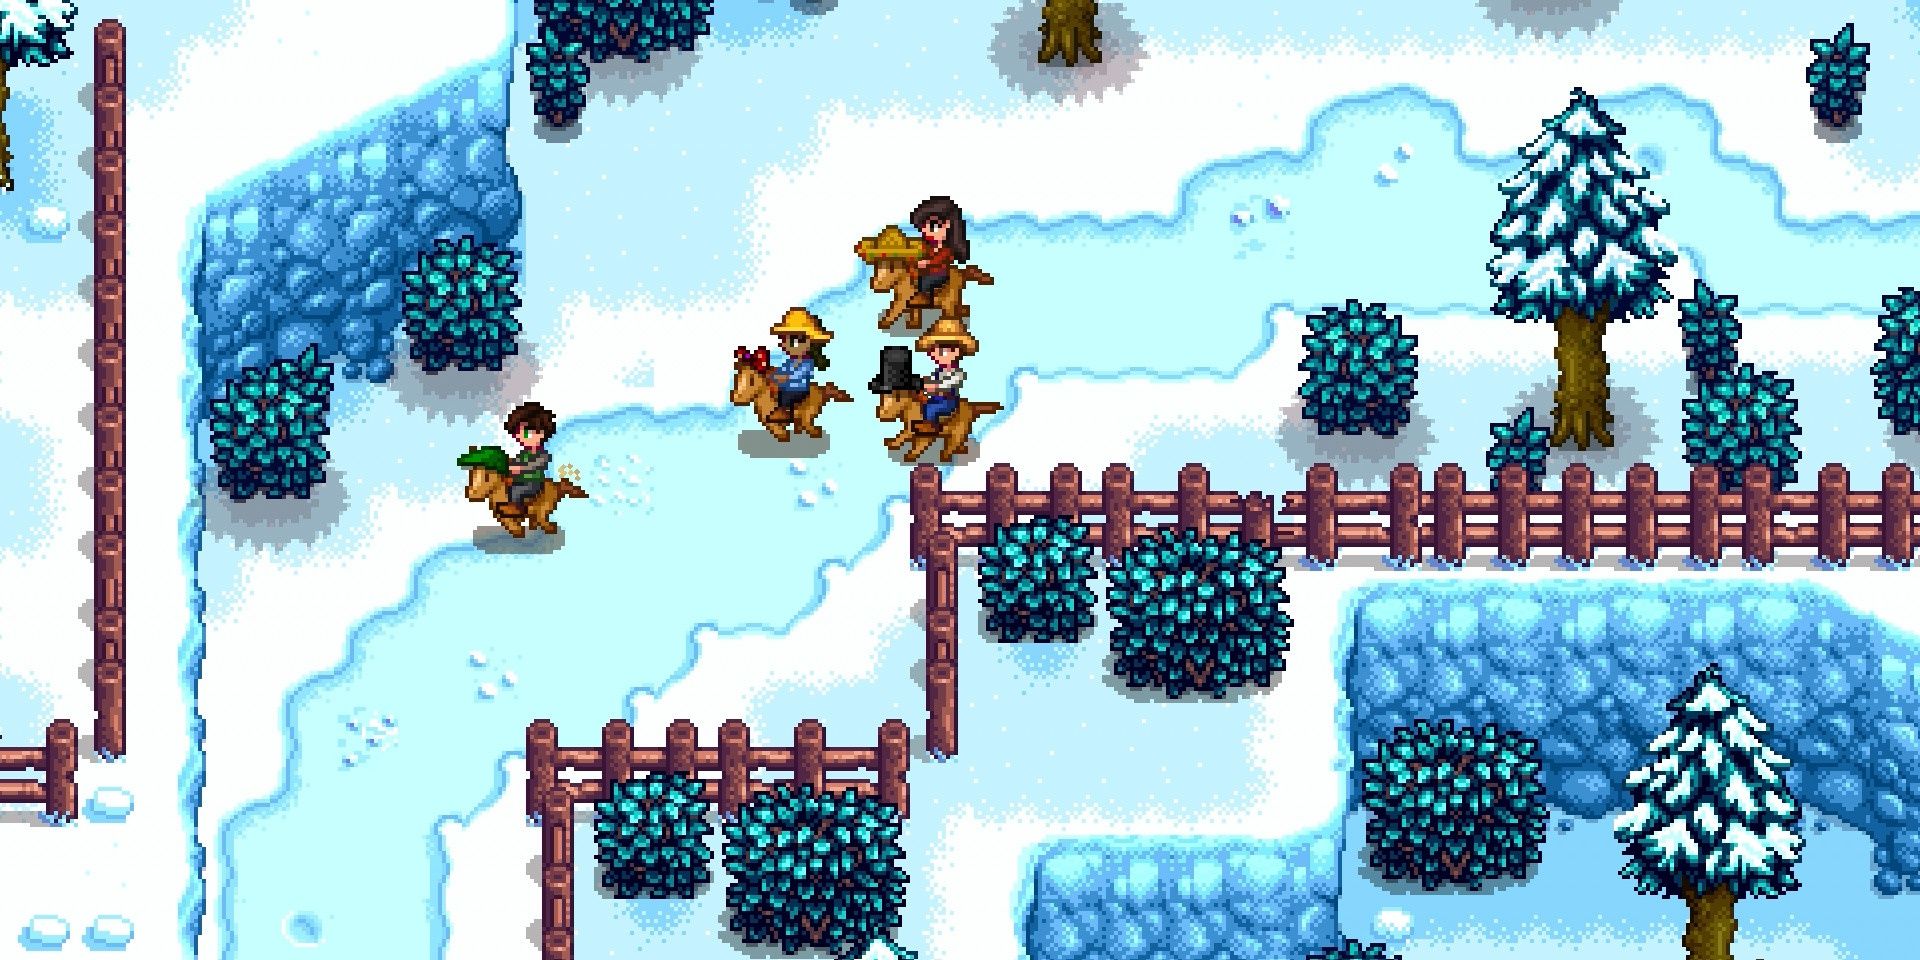 Four players in Stardew Valley riding on horses in the winter